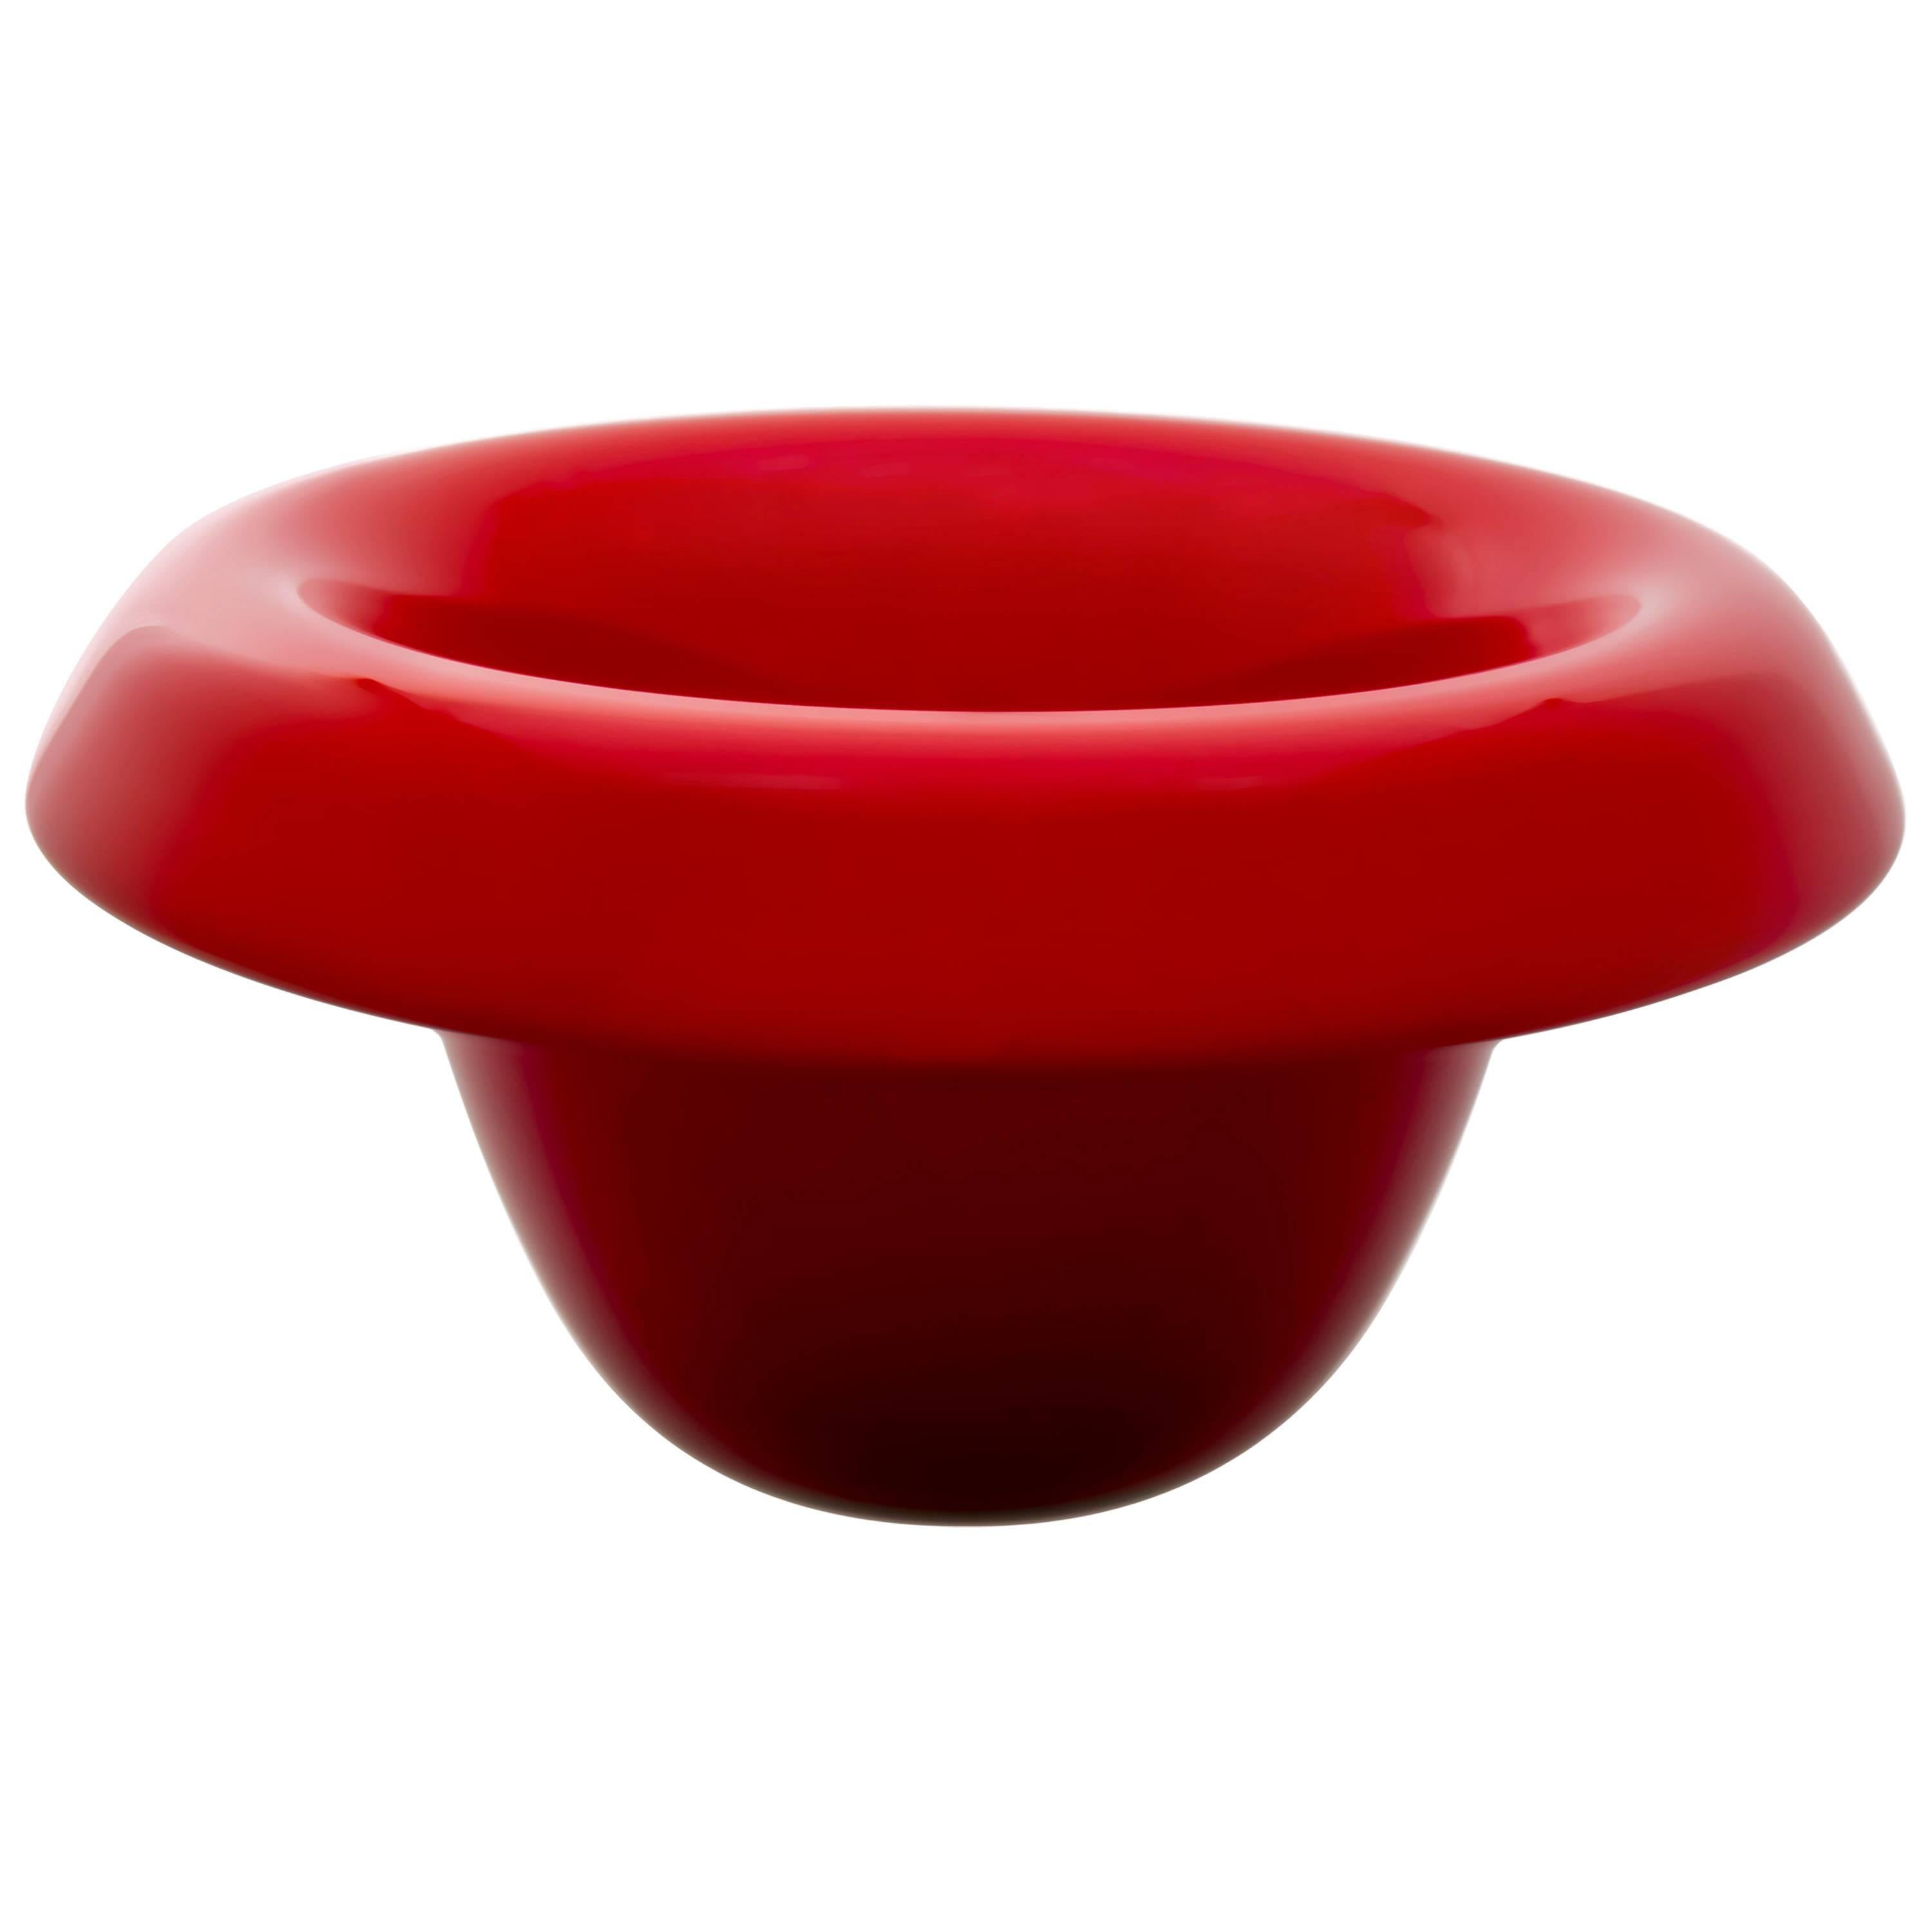 Folded lip bowl designed by Caleb Siemon, made in California by Siemon & Salazar.
These works are a departure from the careful shapes of the banded vessels. They are reminiscent of another era and play with the reflective and malleable qualities of